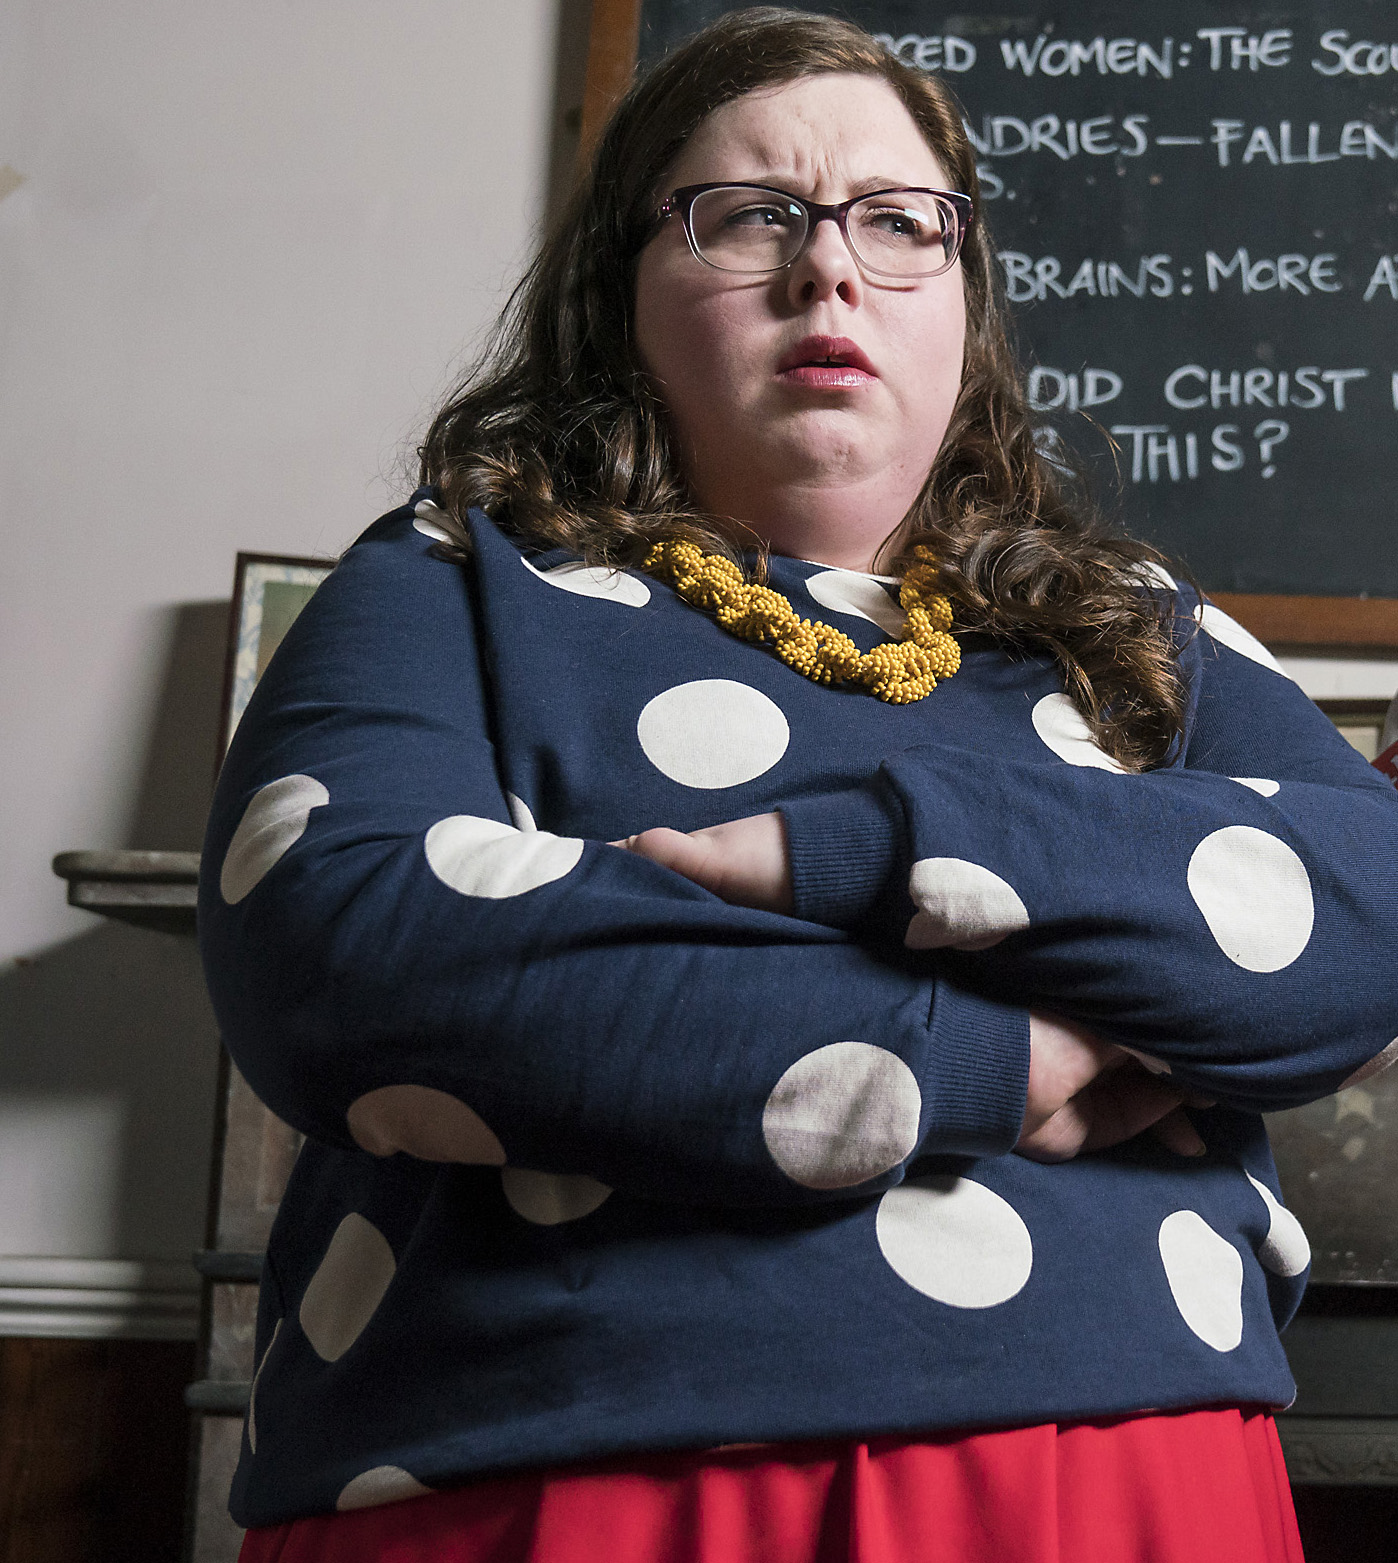 Nowhere Fast - Alison Spittle